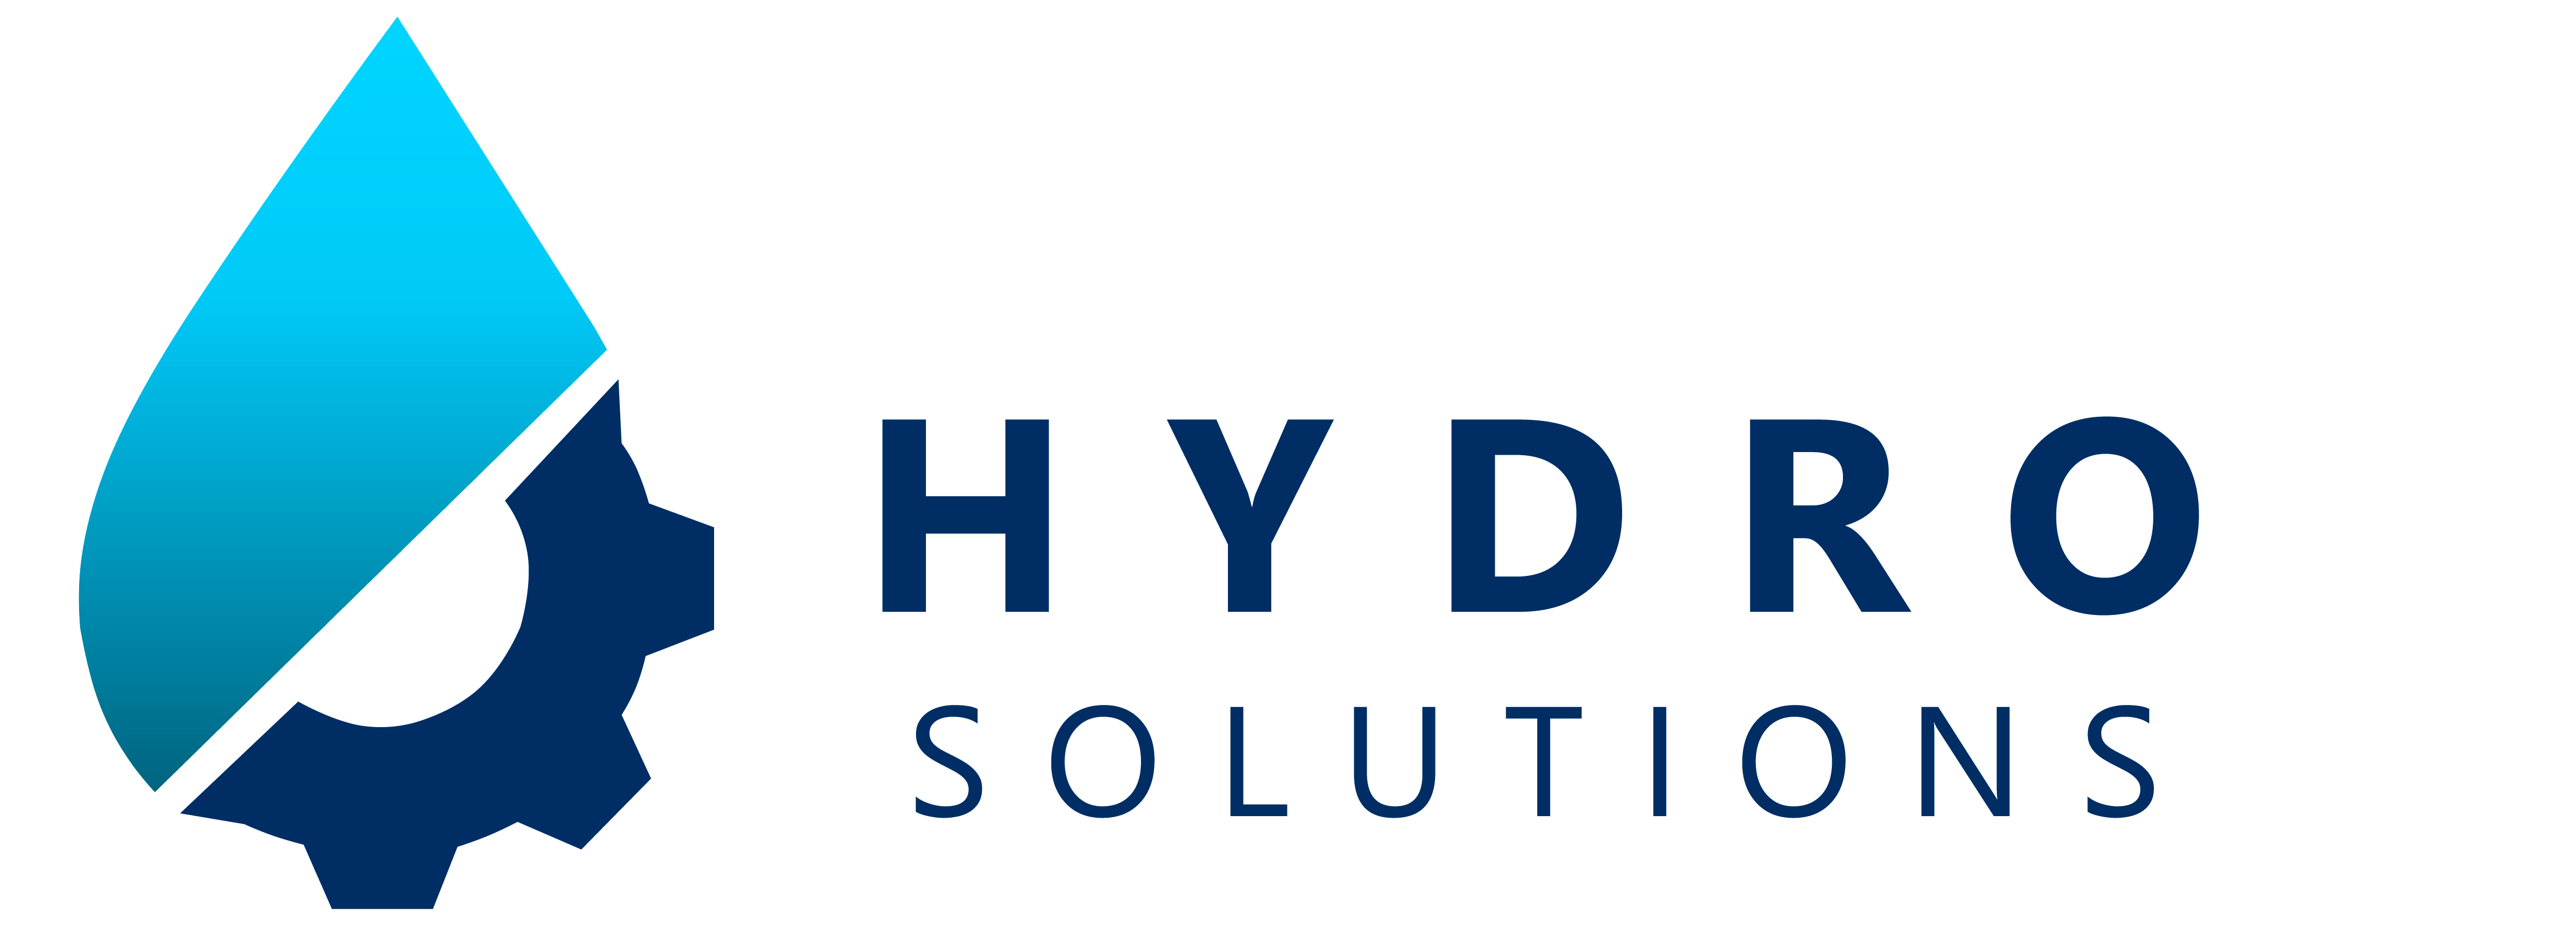 Hydro Solutions